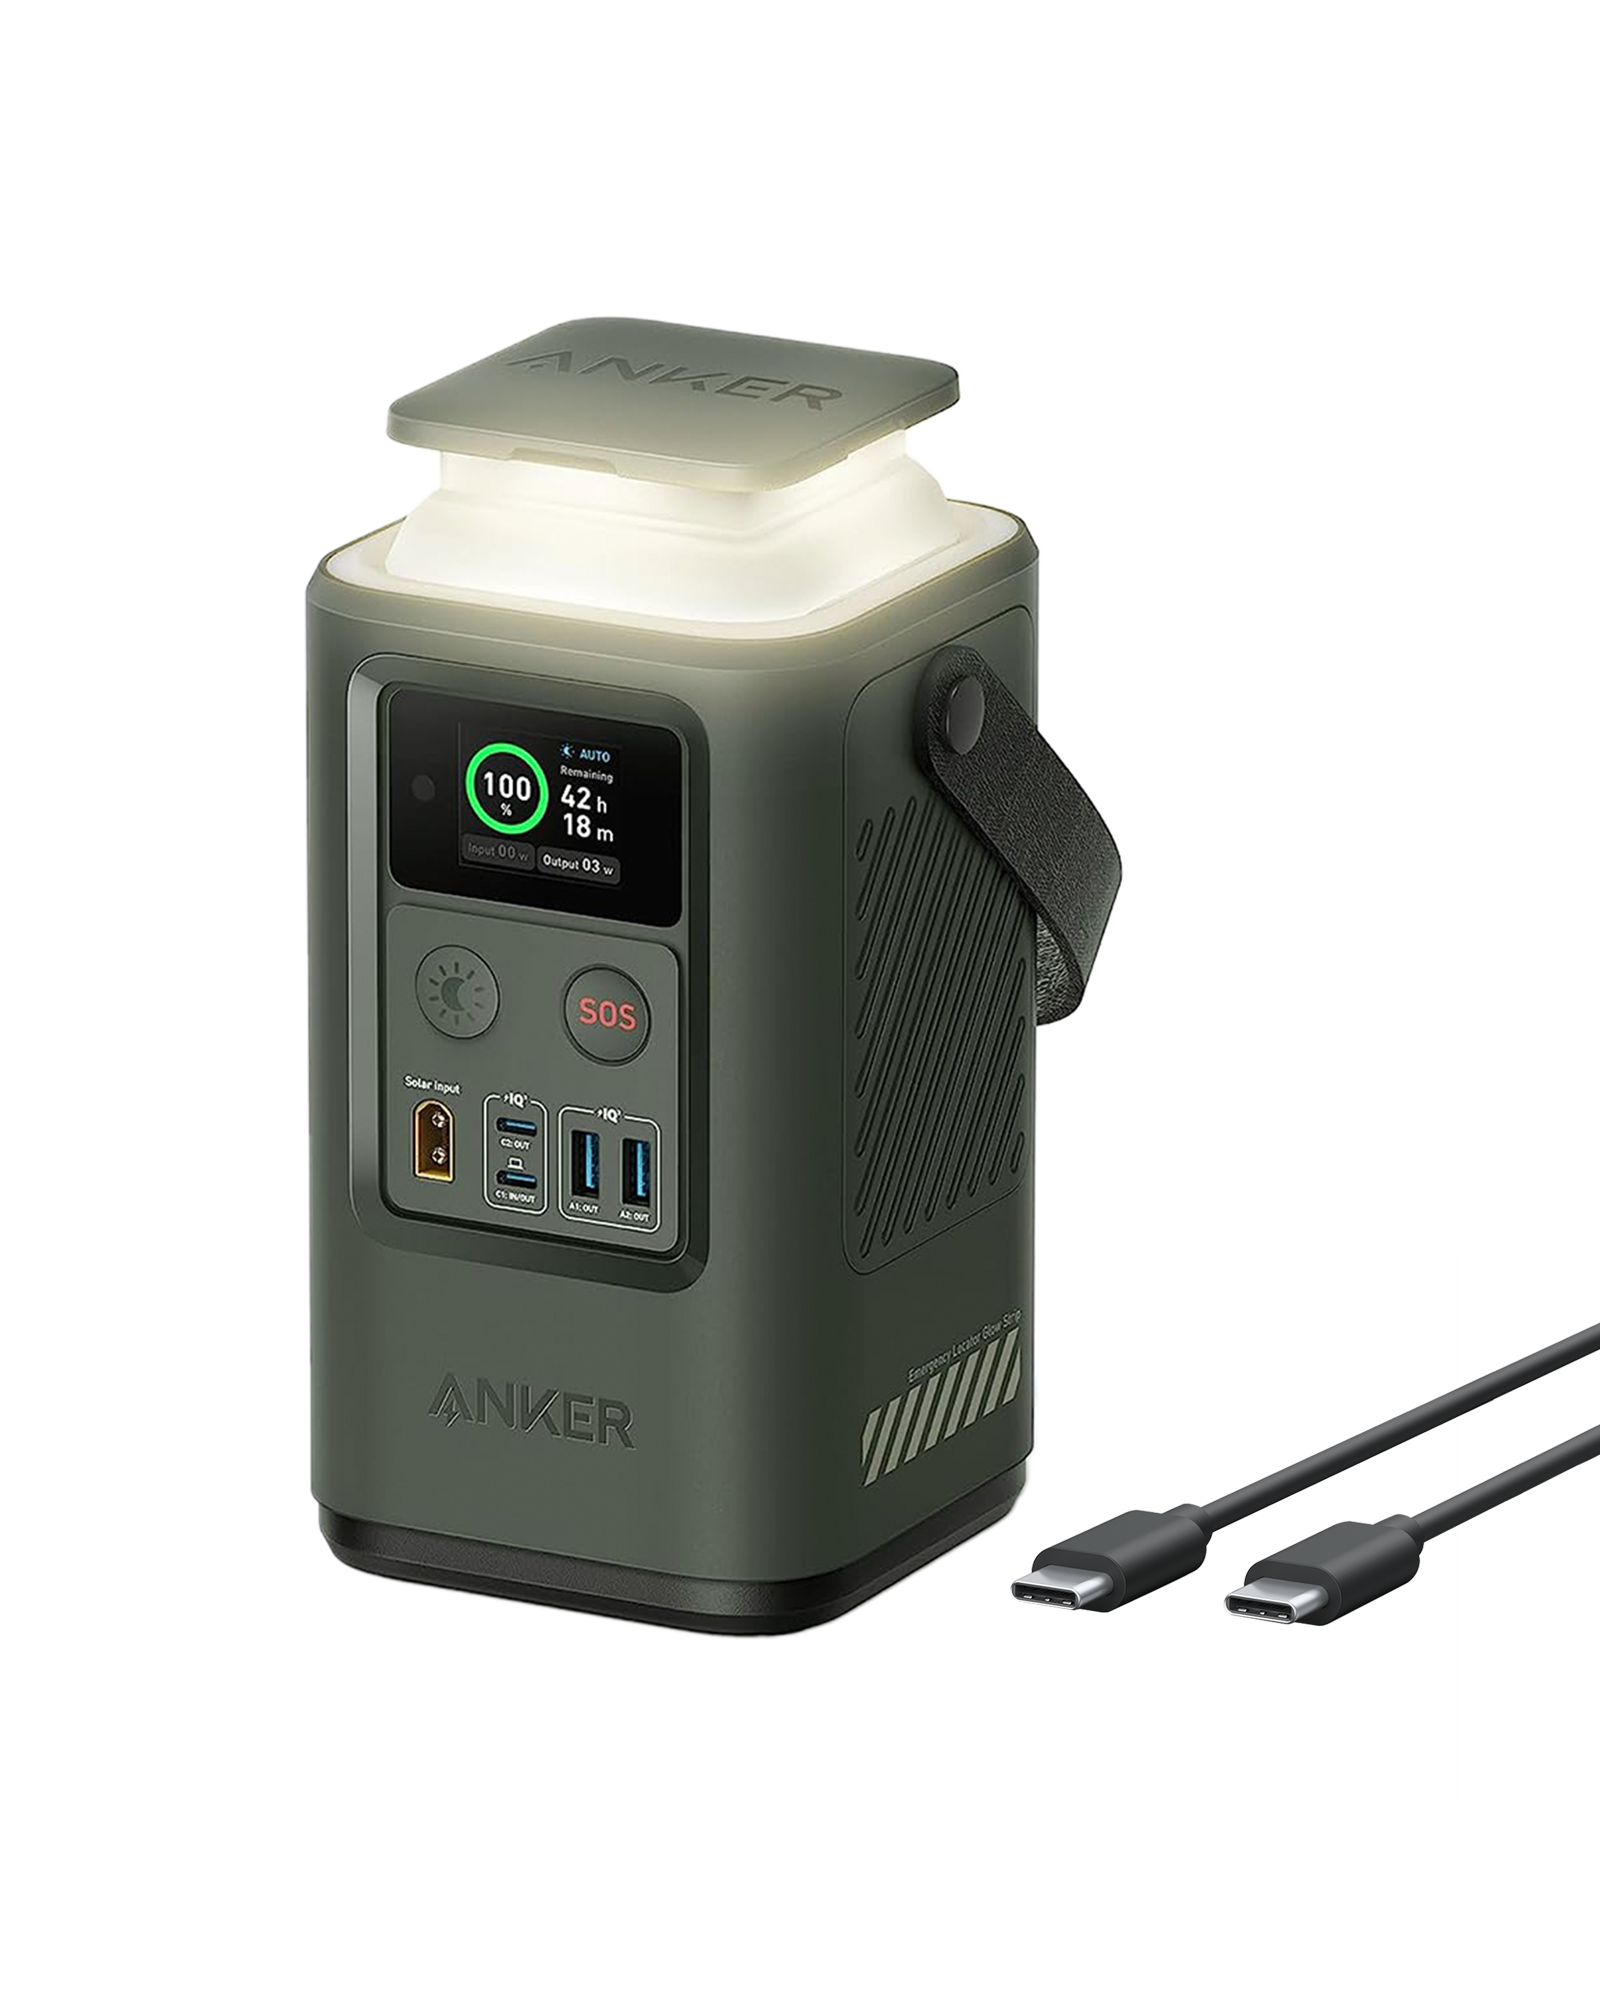 Anker 548 Power - The Ultimate Camping Power Bank with USB-C 60000mAh Capacity - Anker US